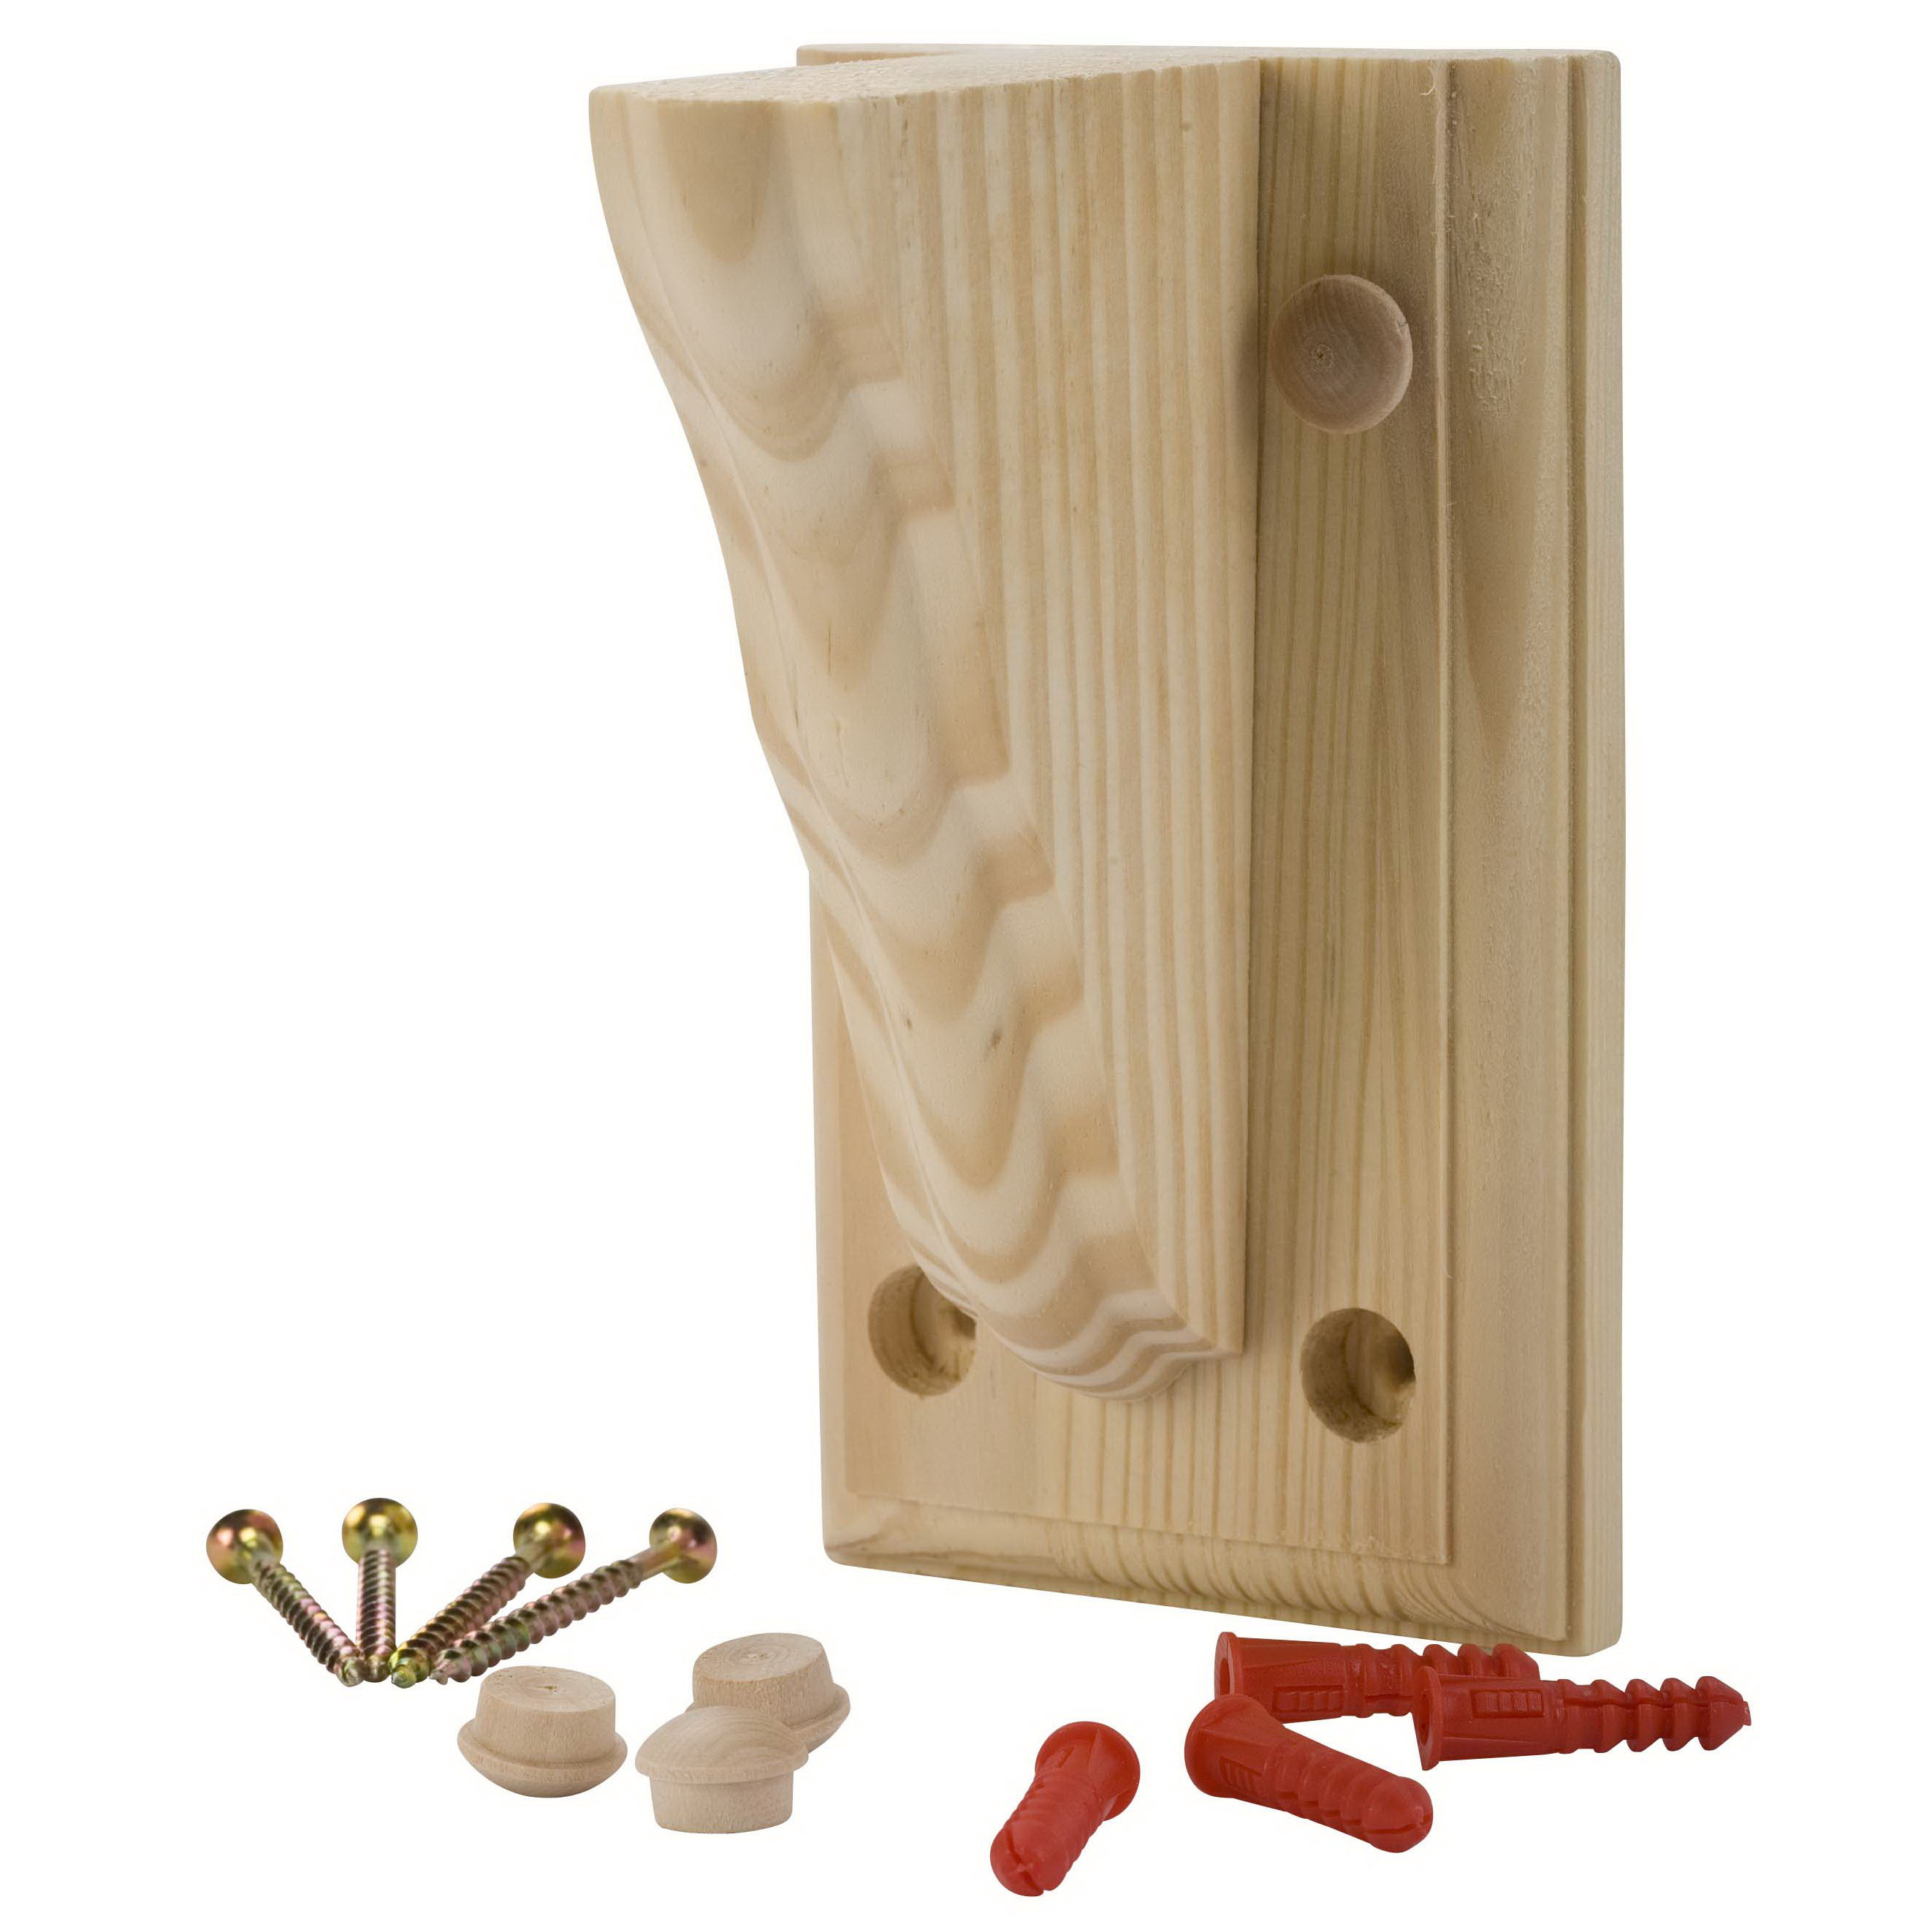 Waddell 352 Bracket, 7-3/4 in L, 5/4 in W, Pine Wood, Natural, Satin - 1